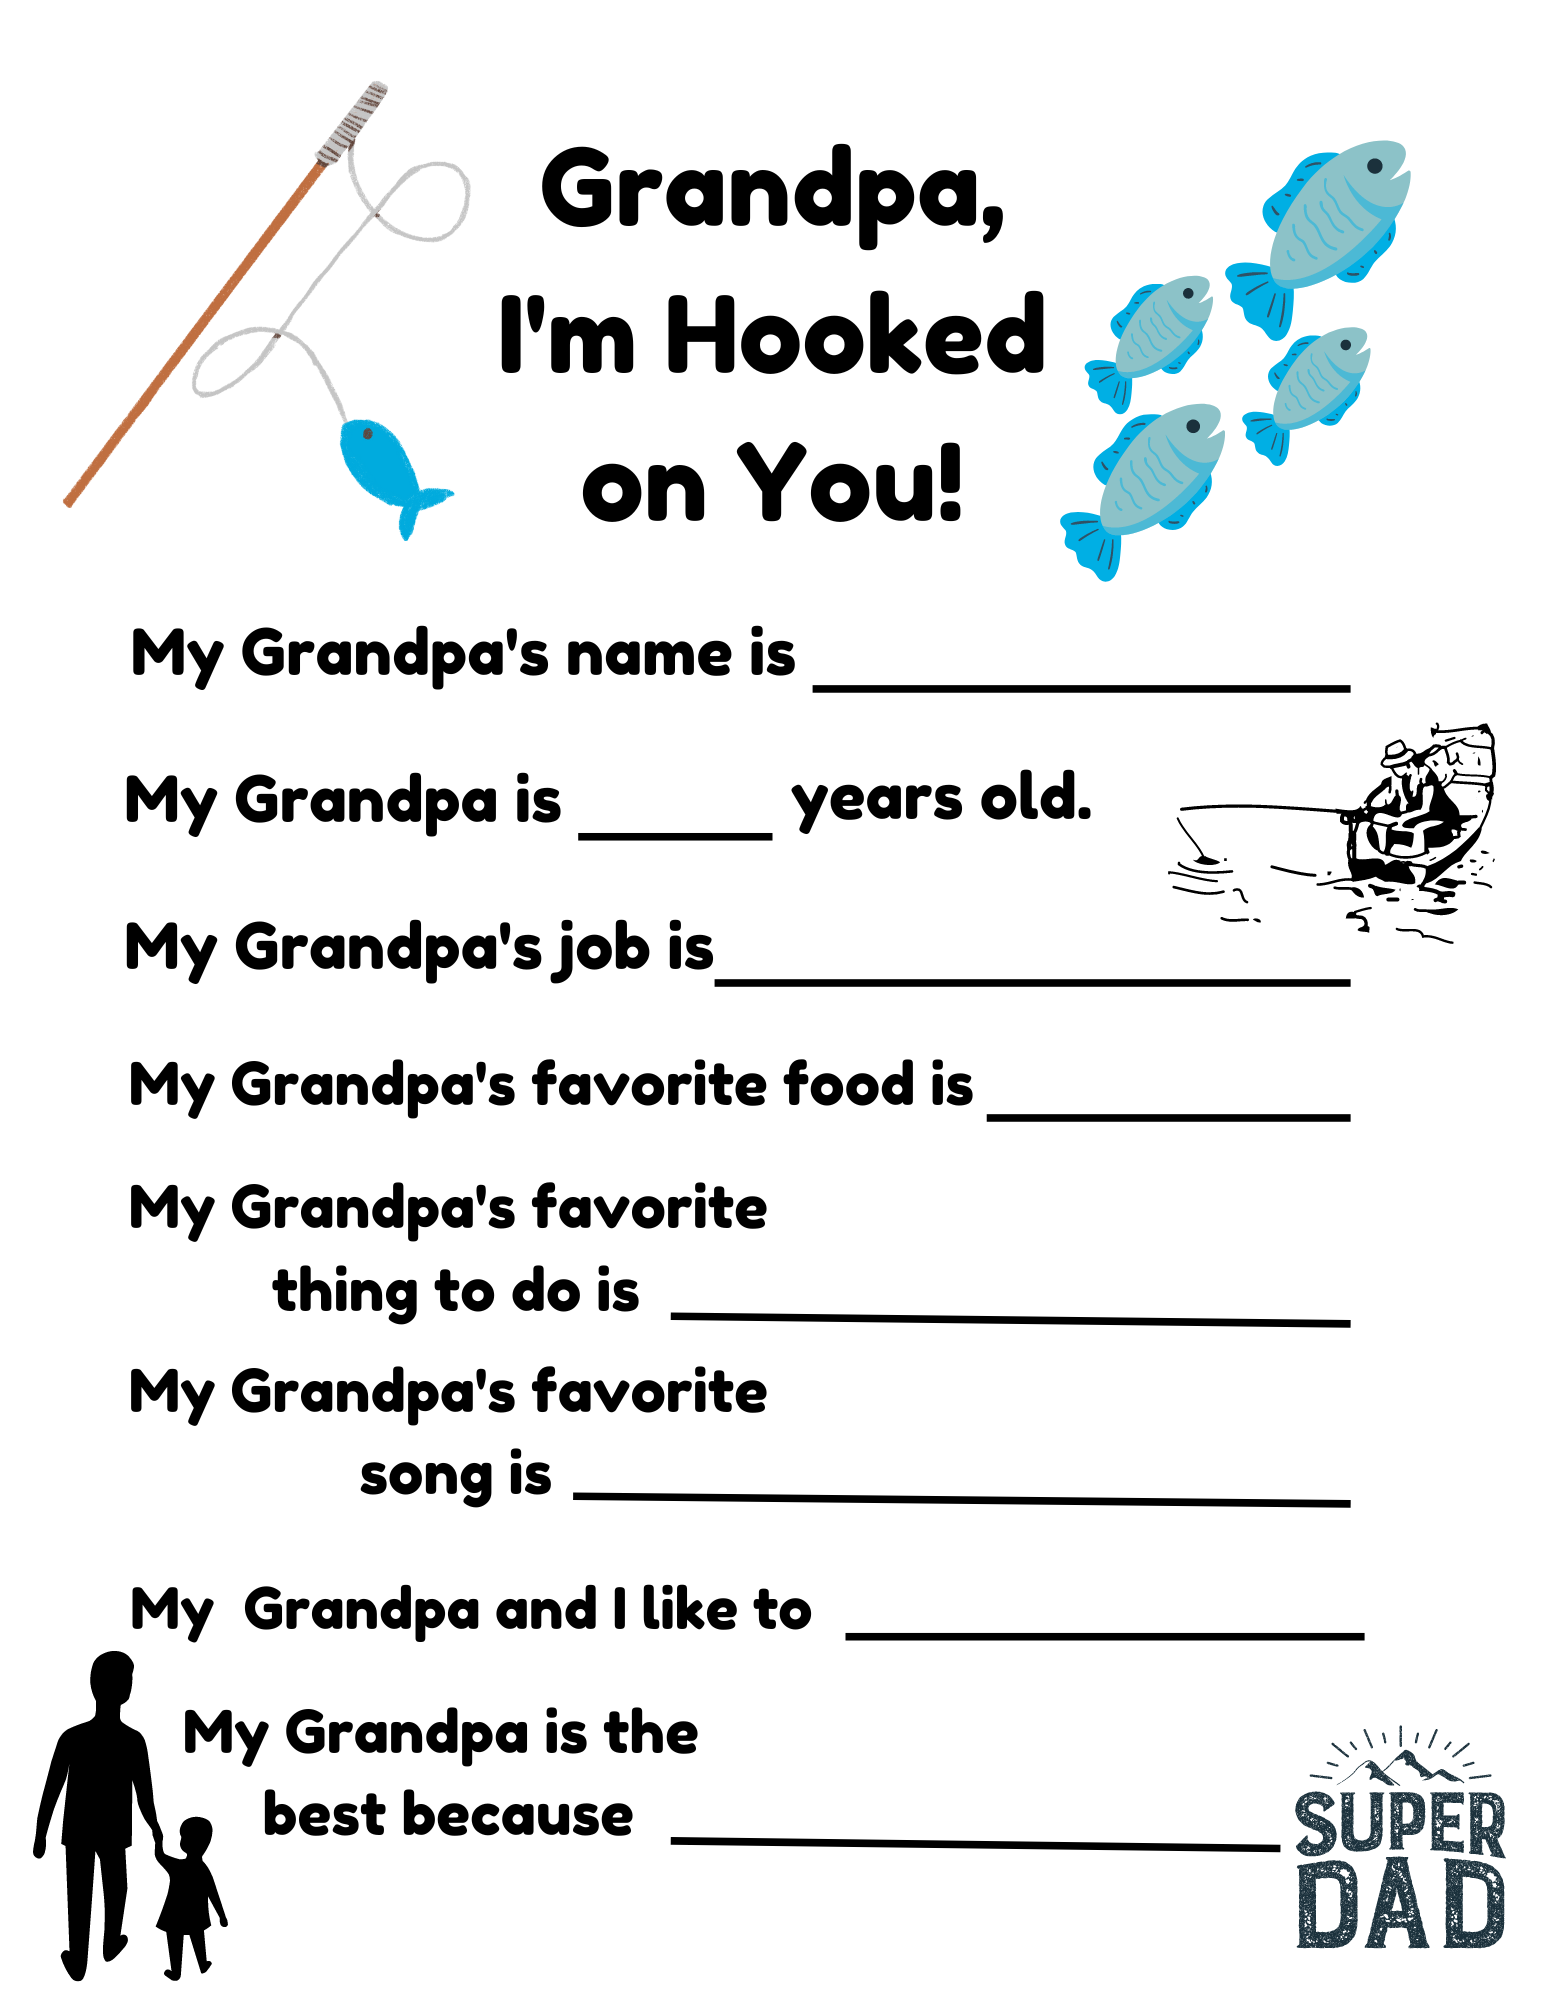 Grandpa Questionnaire Template for Kids